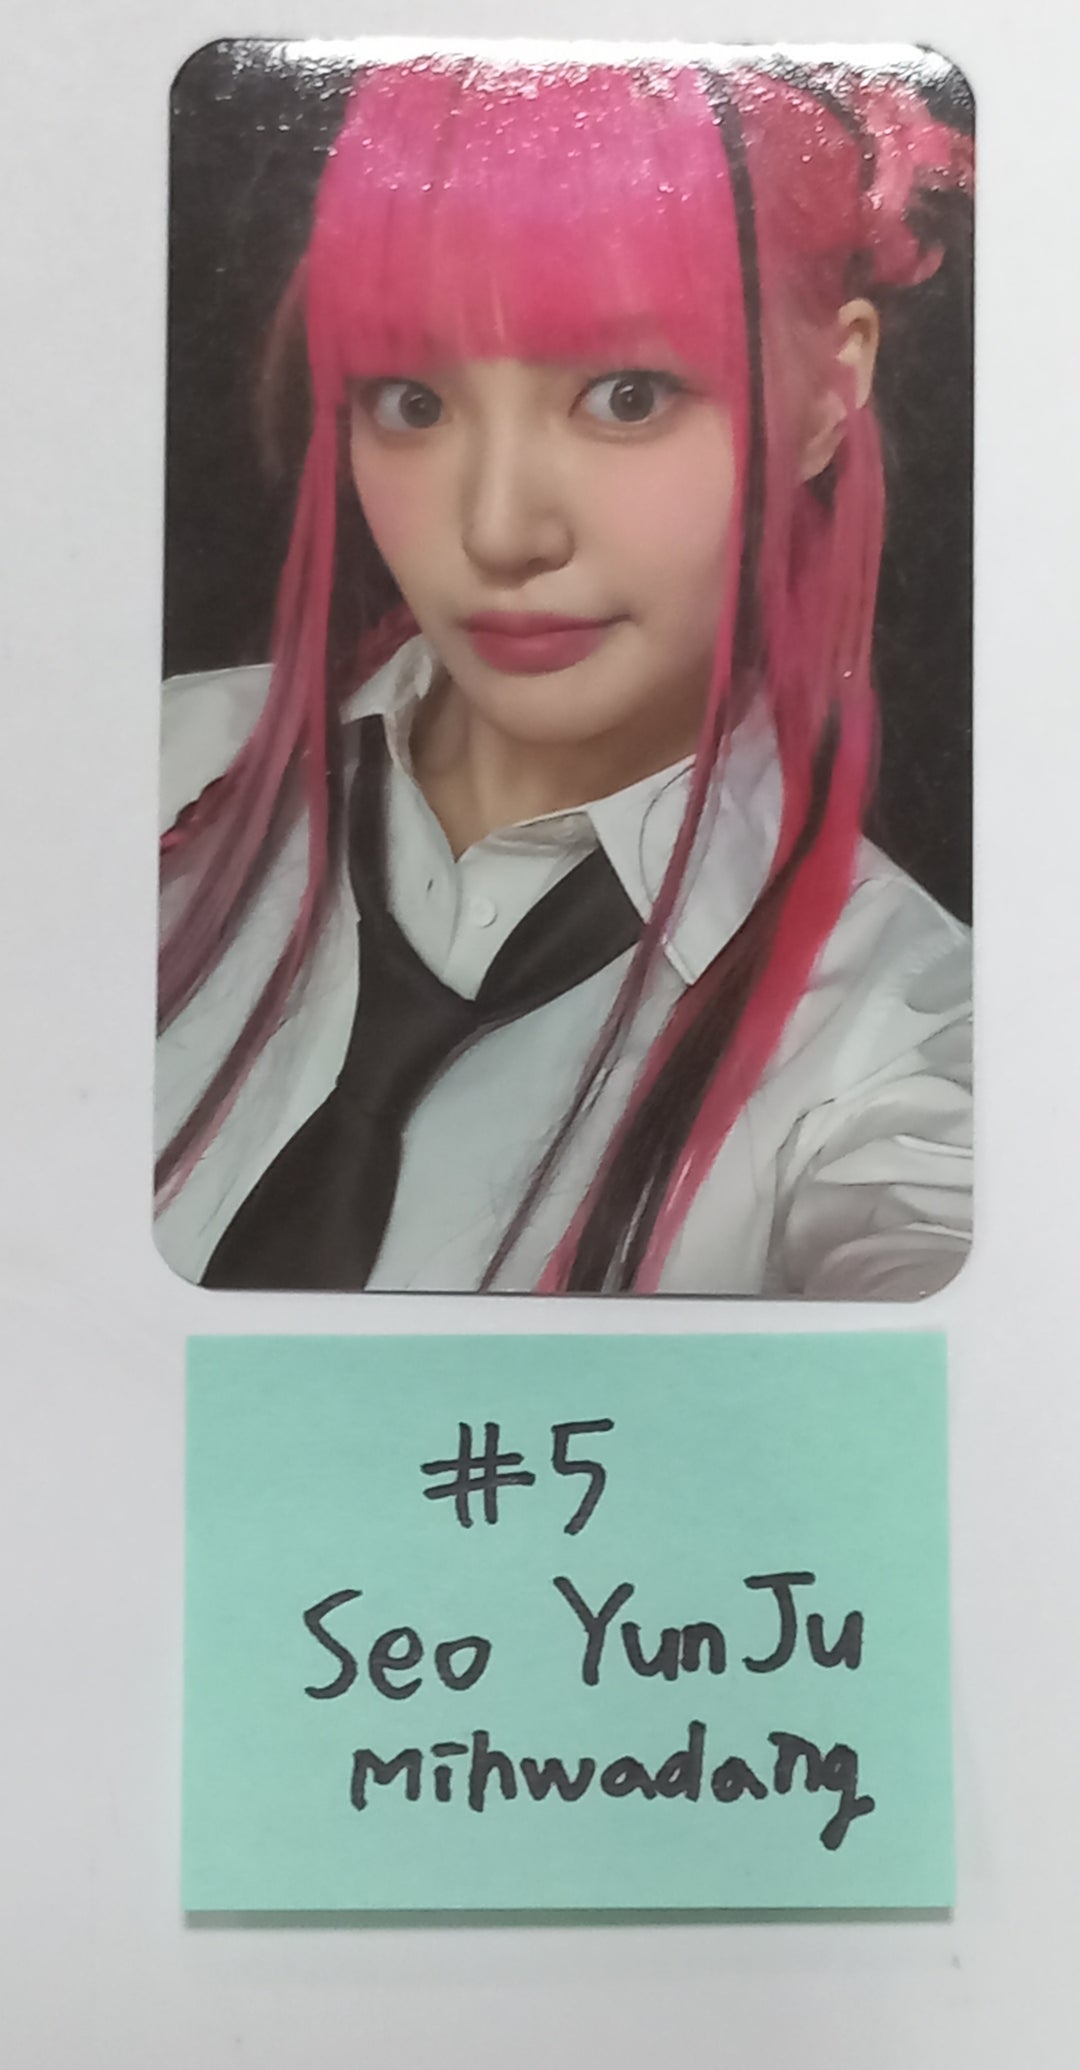 Mimiirose "LIVE" - Mihwadang Fansign Event Photocard [23.11.16]